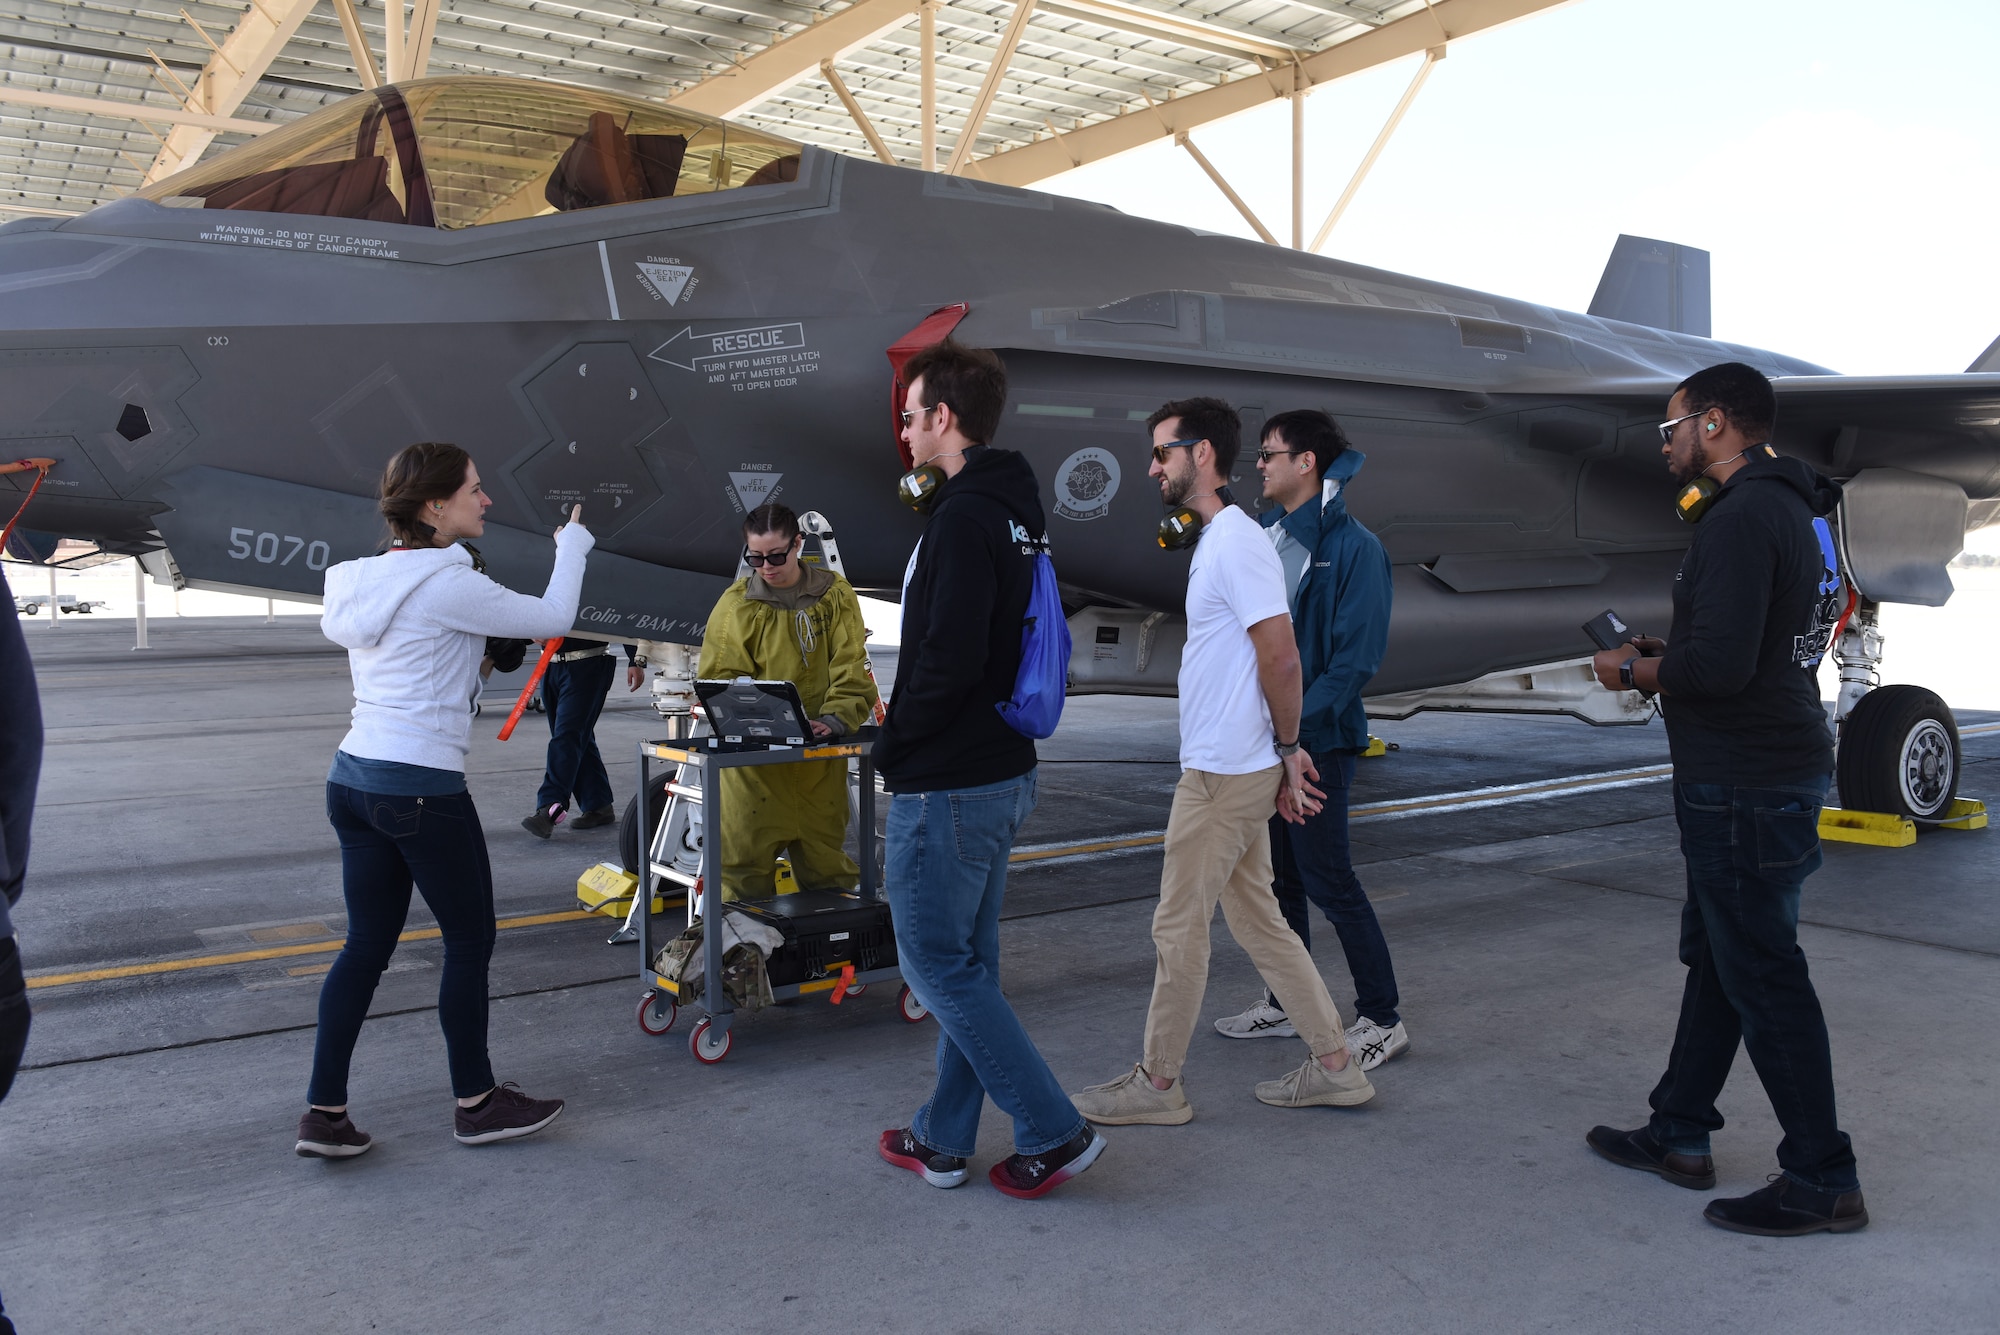 Maj. Jennifer Kannegaard, left, a product manager for the Mad Hatter F-35 Lightning II Joint Strike Fighter software project, leads her software design team to a working area for 57th Wing Bolt Aircraft maintenance unit maintainers April 10, 2019 at Nellis Air Force Base, Nev. Kannegaard’s team is working to equip Nellis maintainers with programs that will quickly and easily locate the most up-to-date technical orders for use in aircraft maintenance. (U.S. Air Force photo by Airman 1st Class Bailee Darbaise)